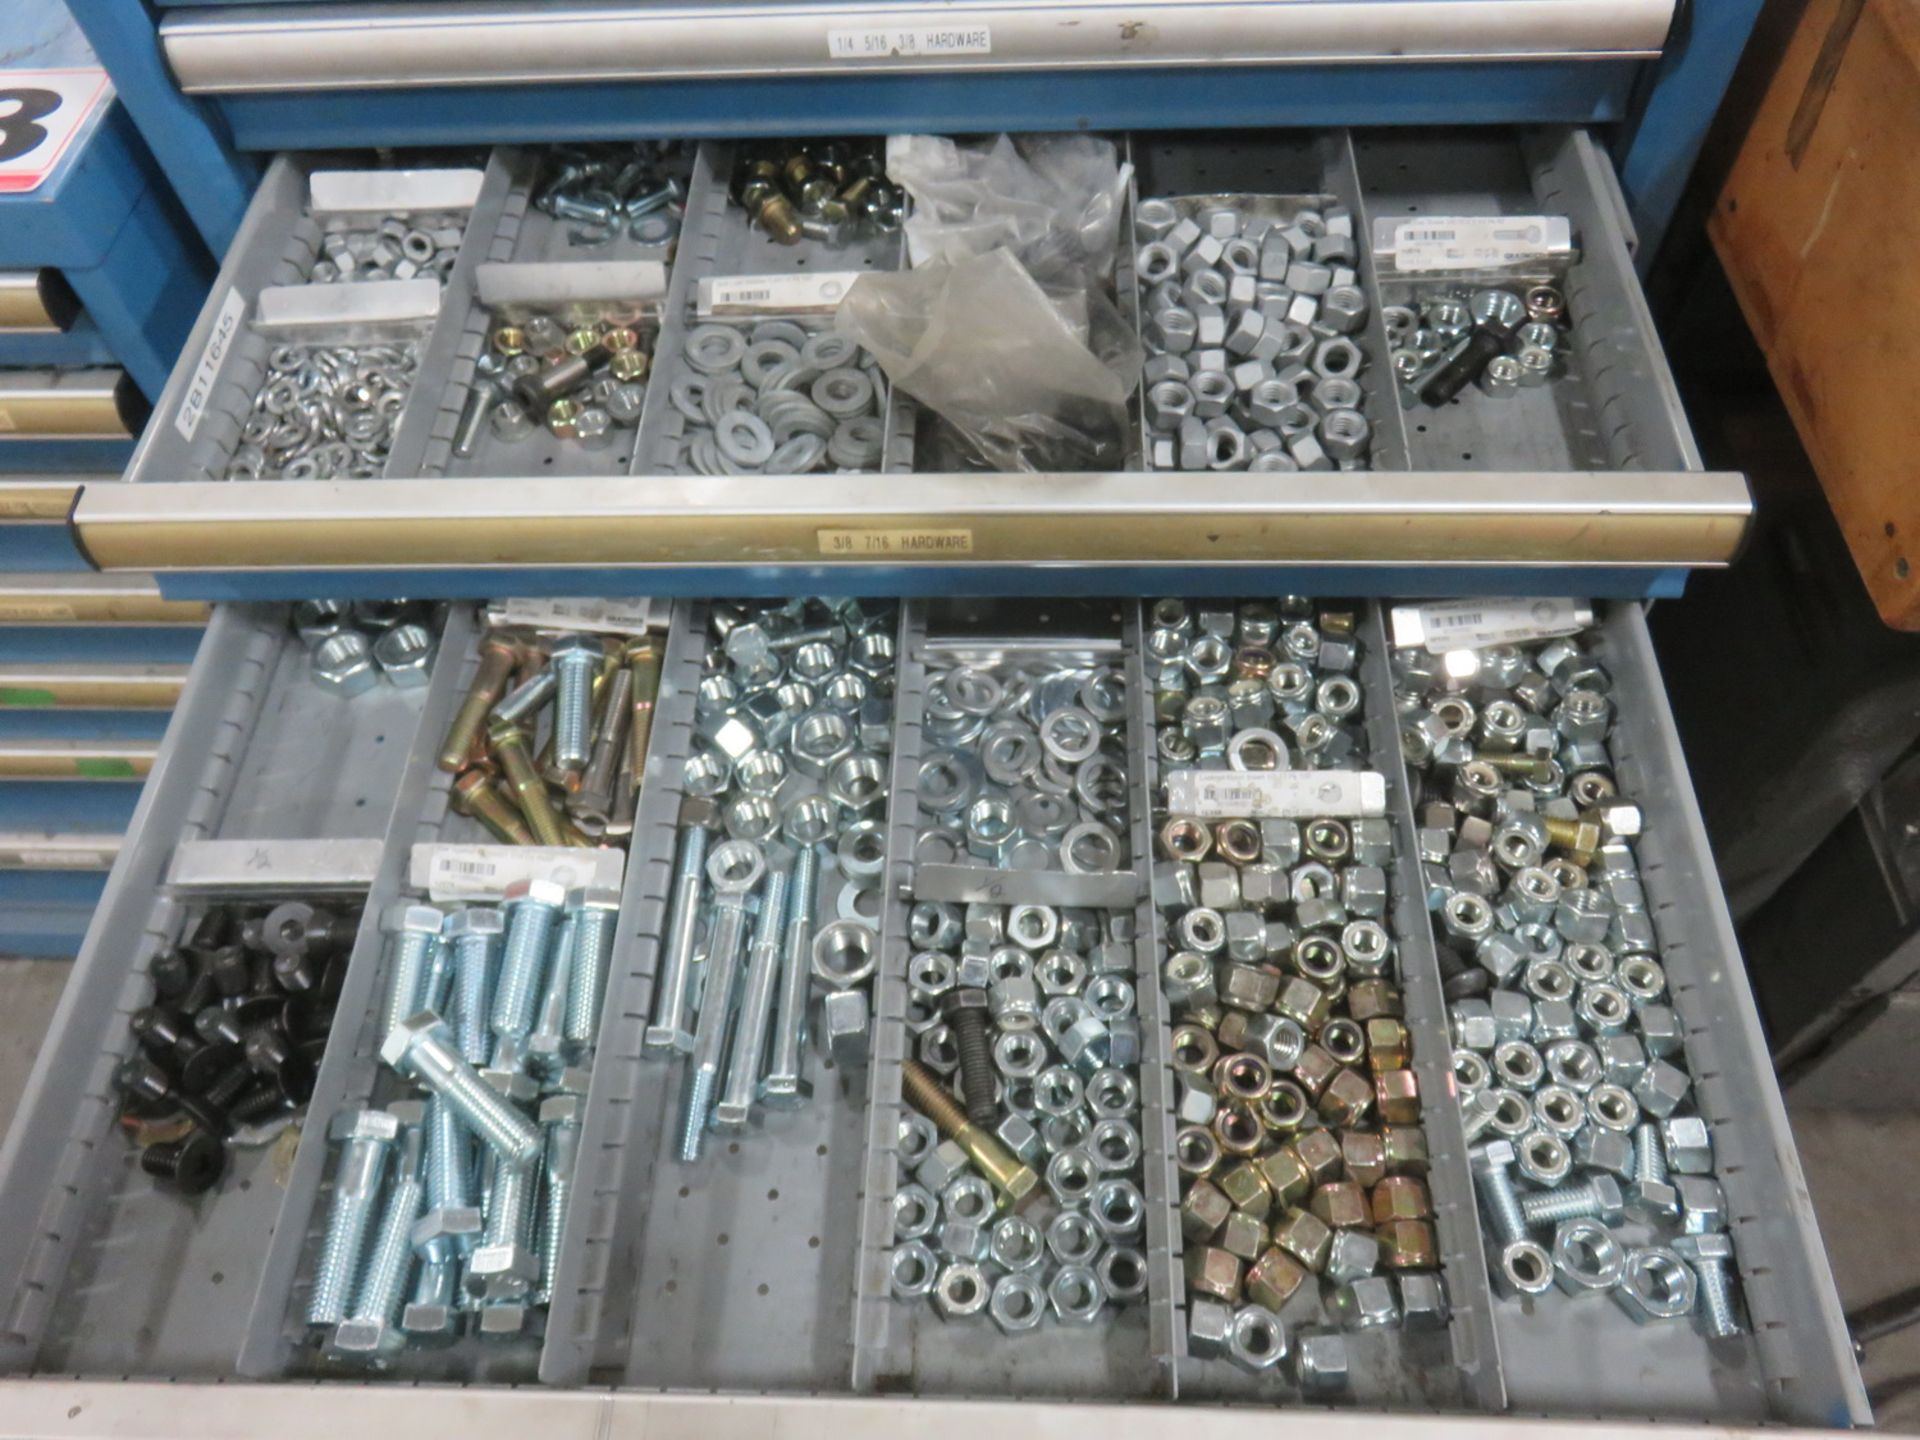 LISTA BLUE STEEL 10 DRAWER CABINET W/ SCREW, WASHERS, NUTS - Image 4 of 6